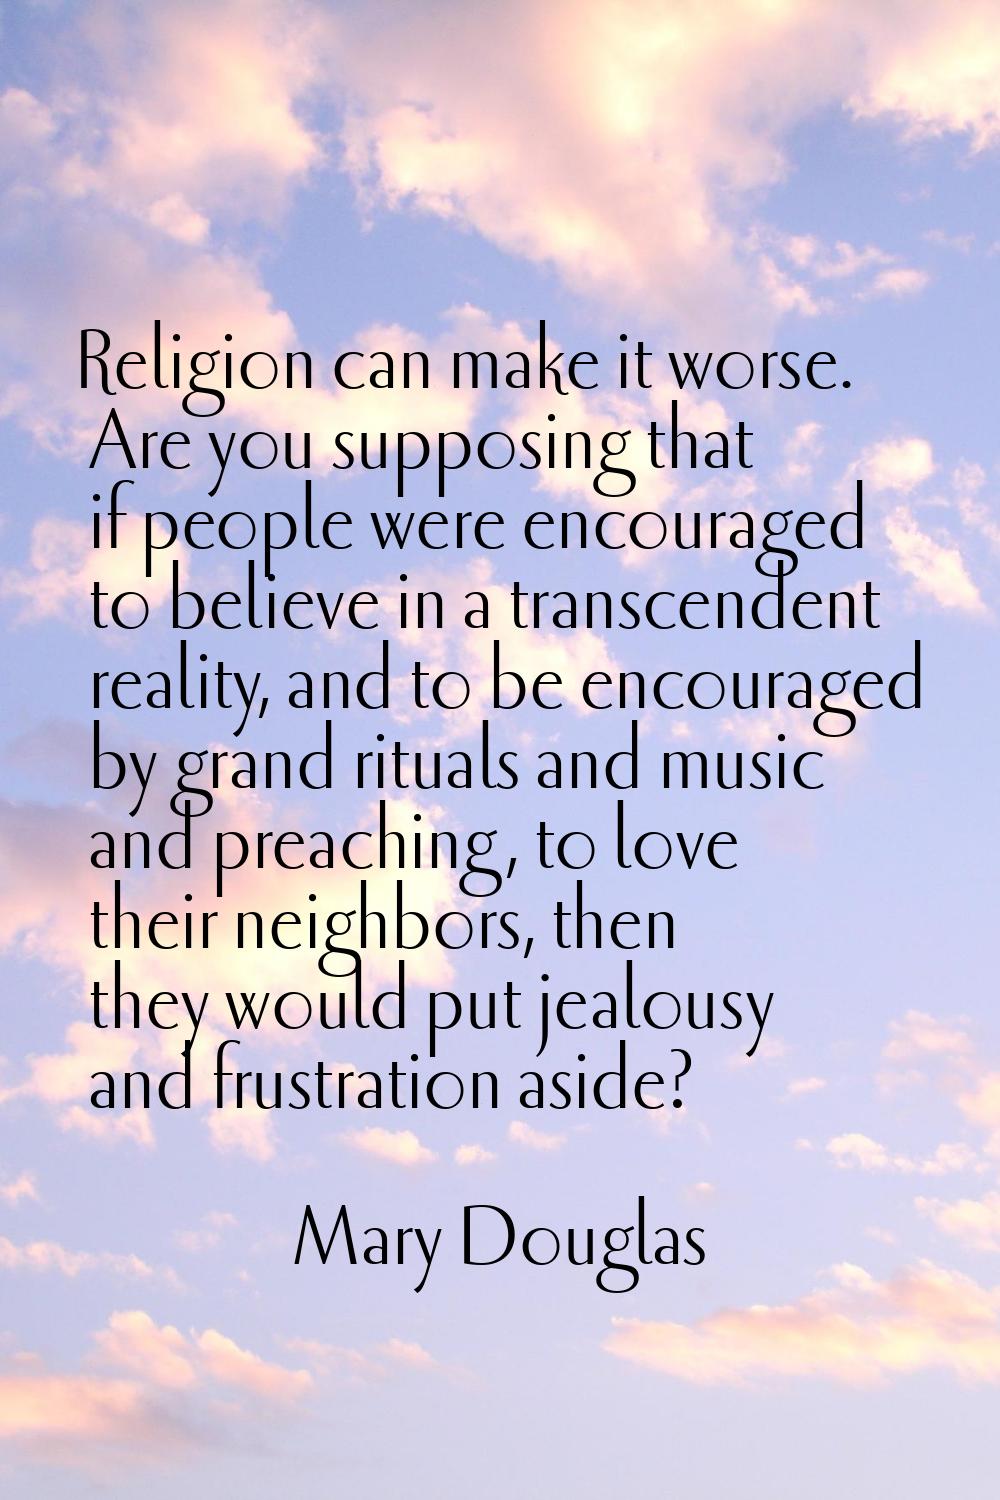 Religion can make it worse. Are you supposing that if people were encouraged to believe in a transc